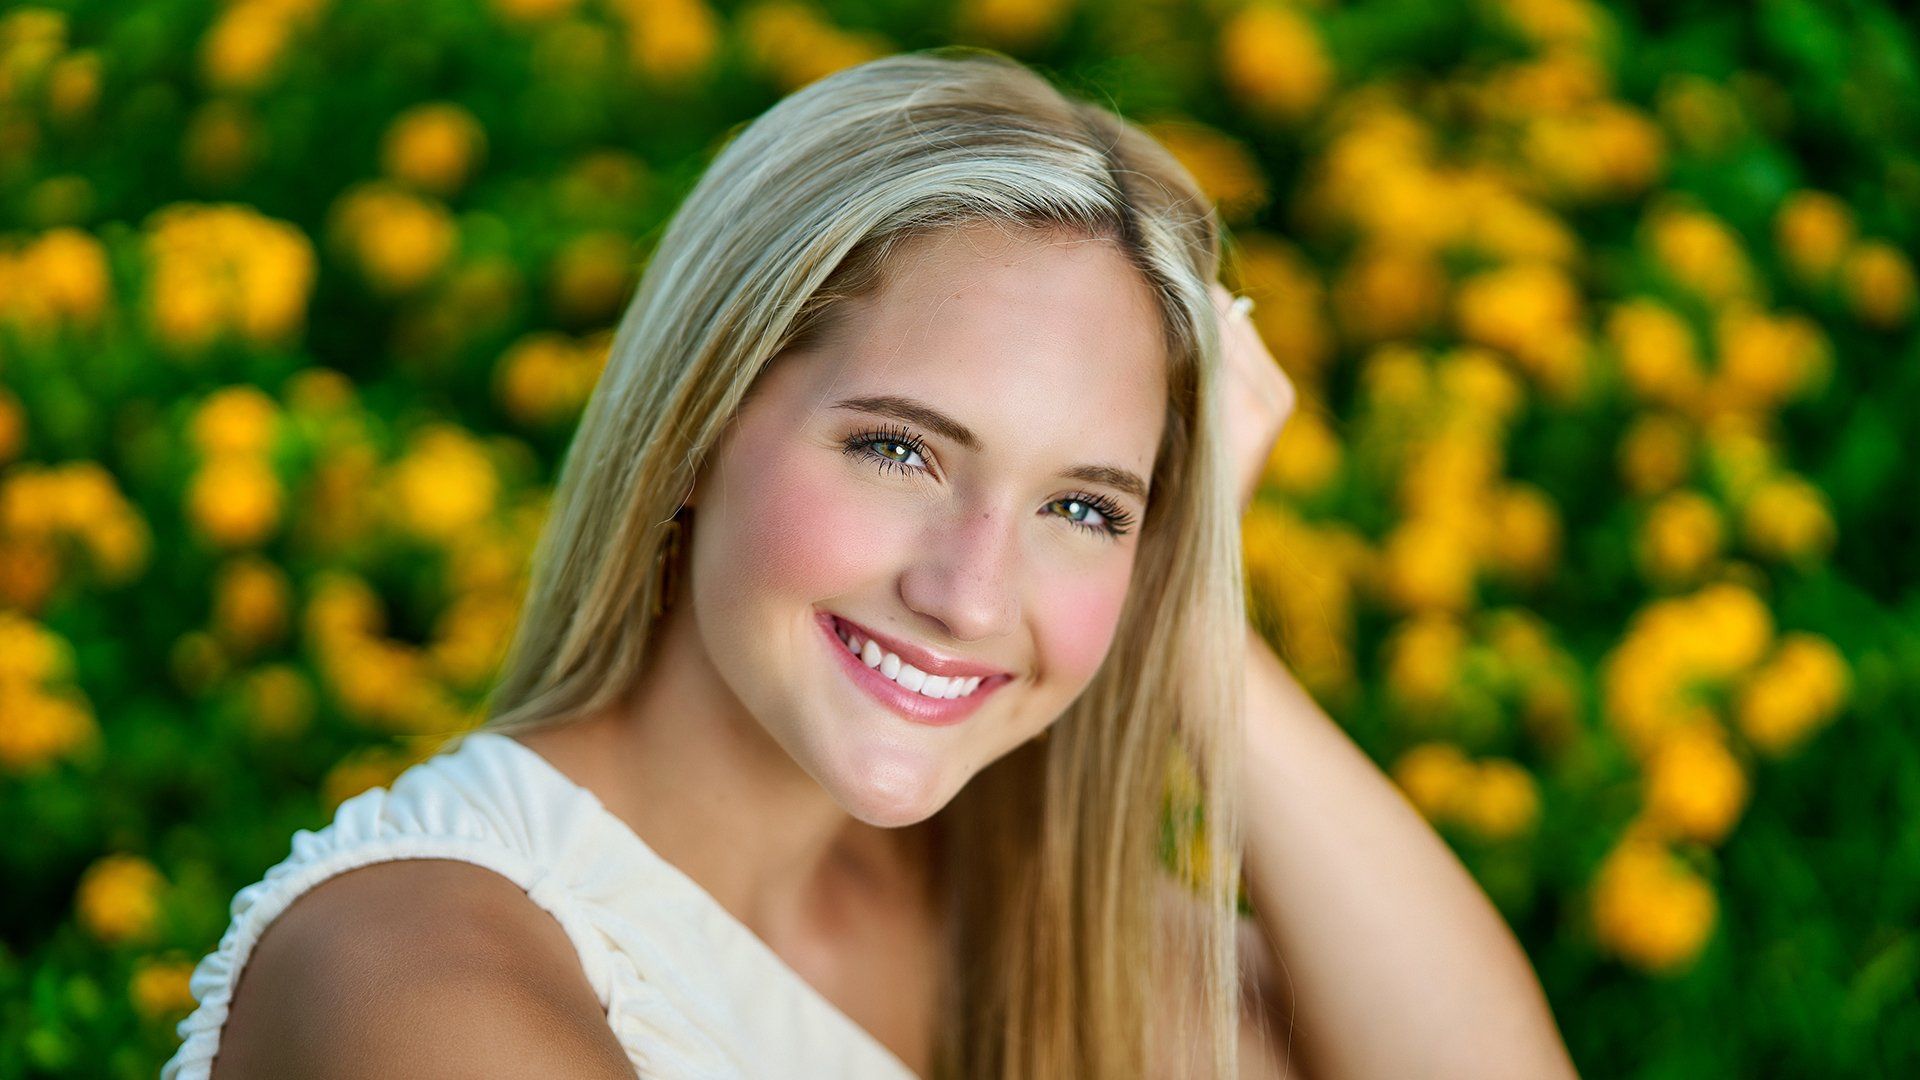 A young woman is smiling in front of a field of yellow flowers.